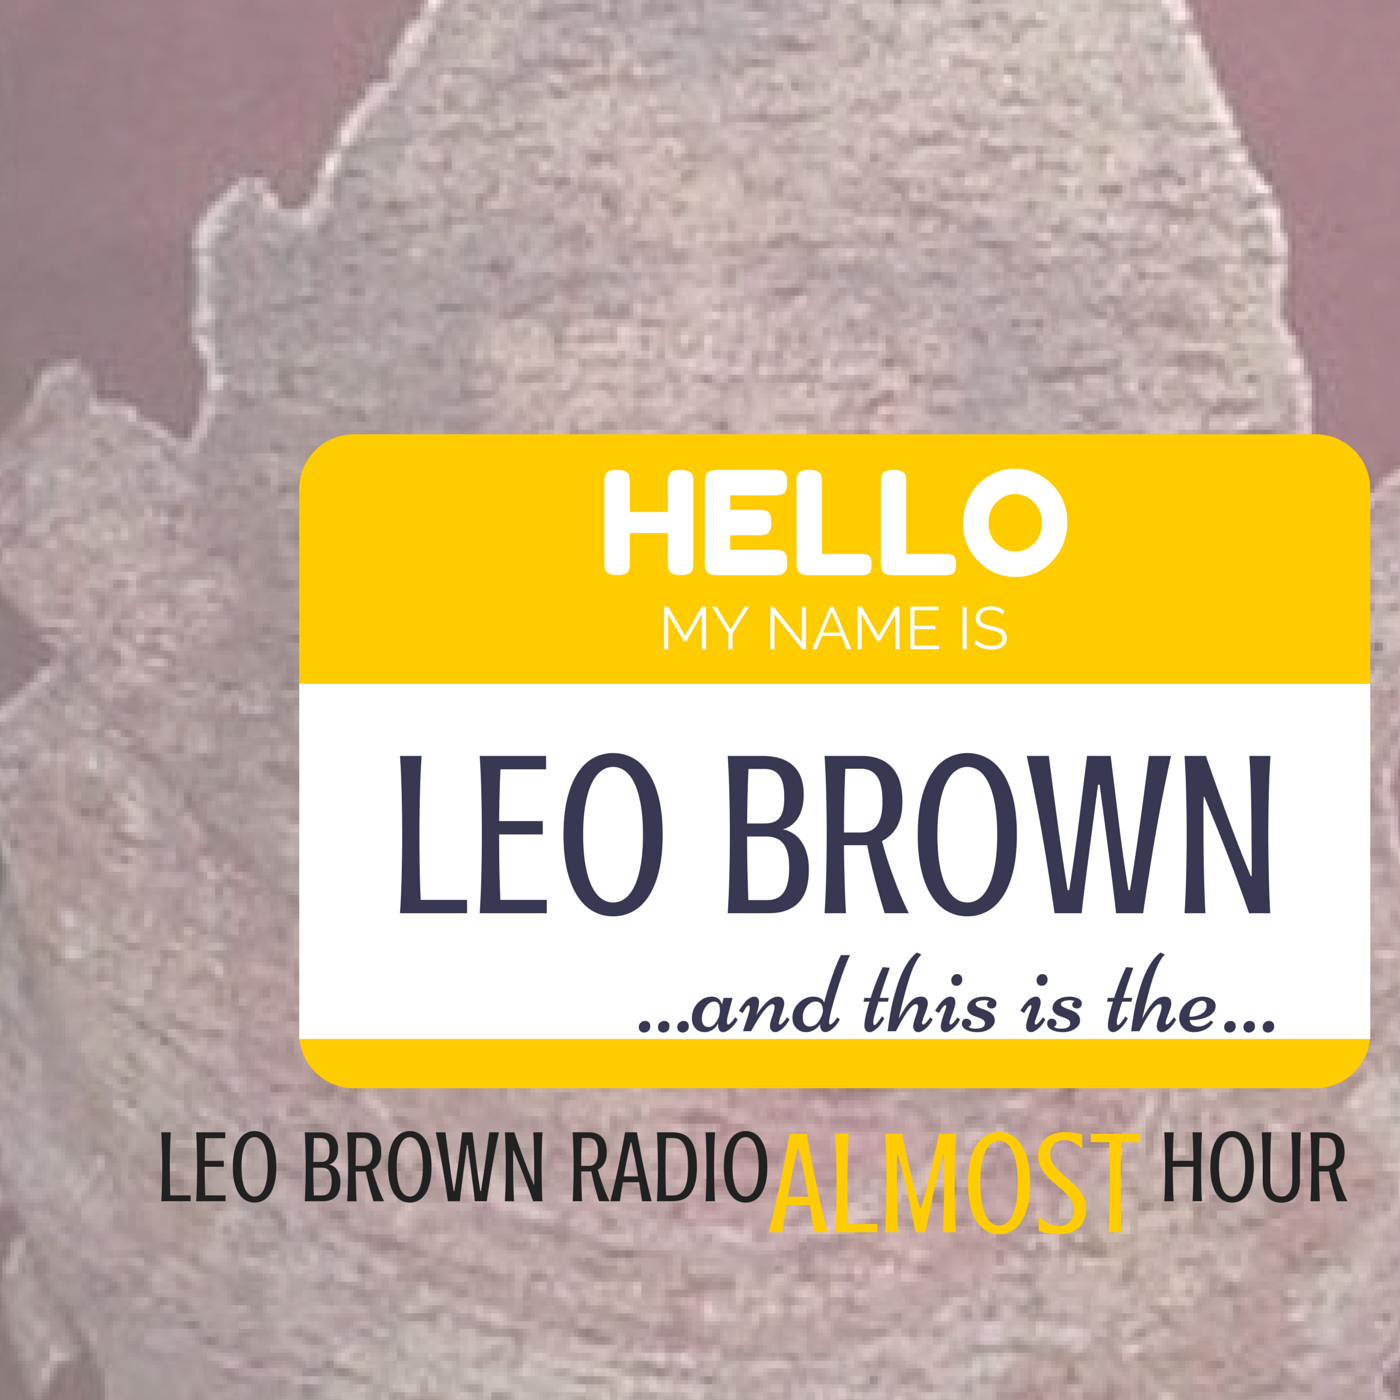 Leo Brown Almost Hour 02/28/17